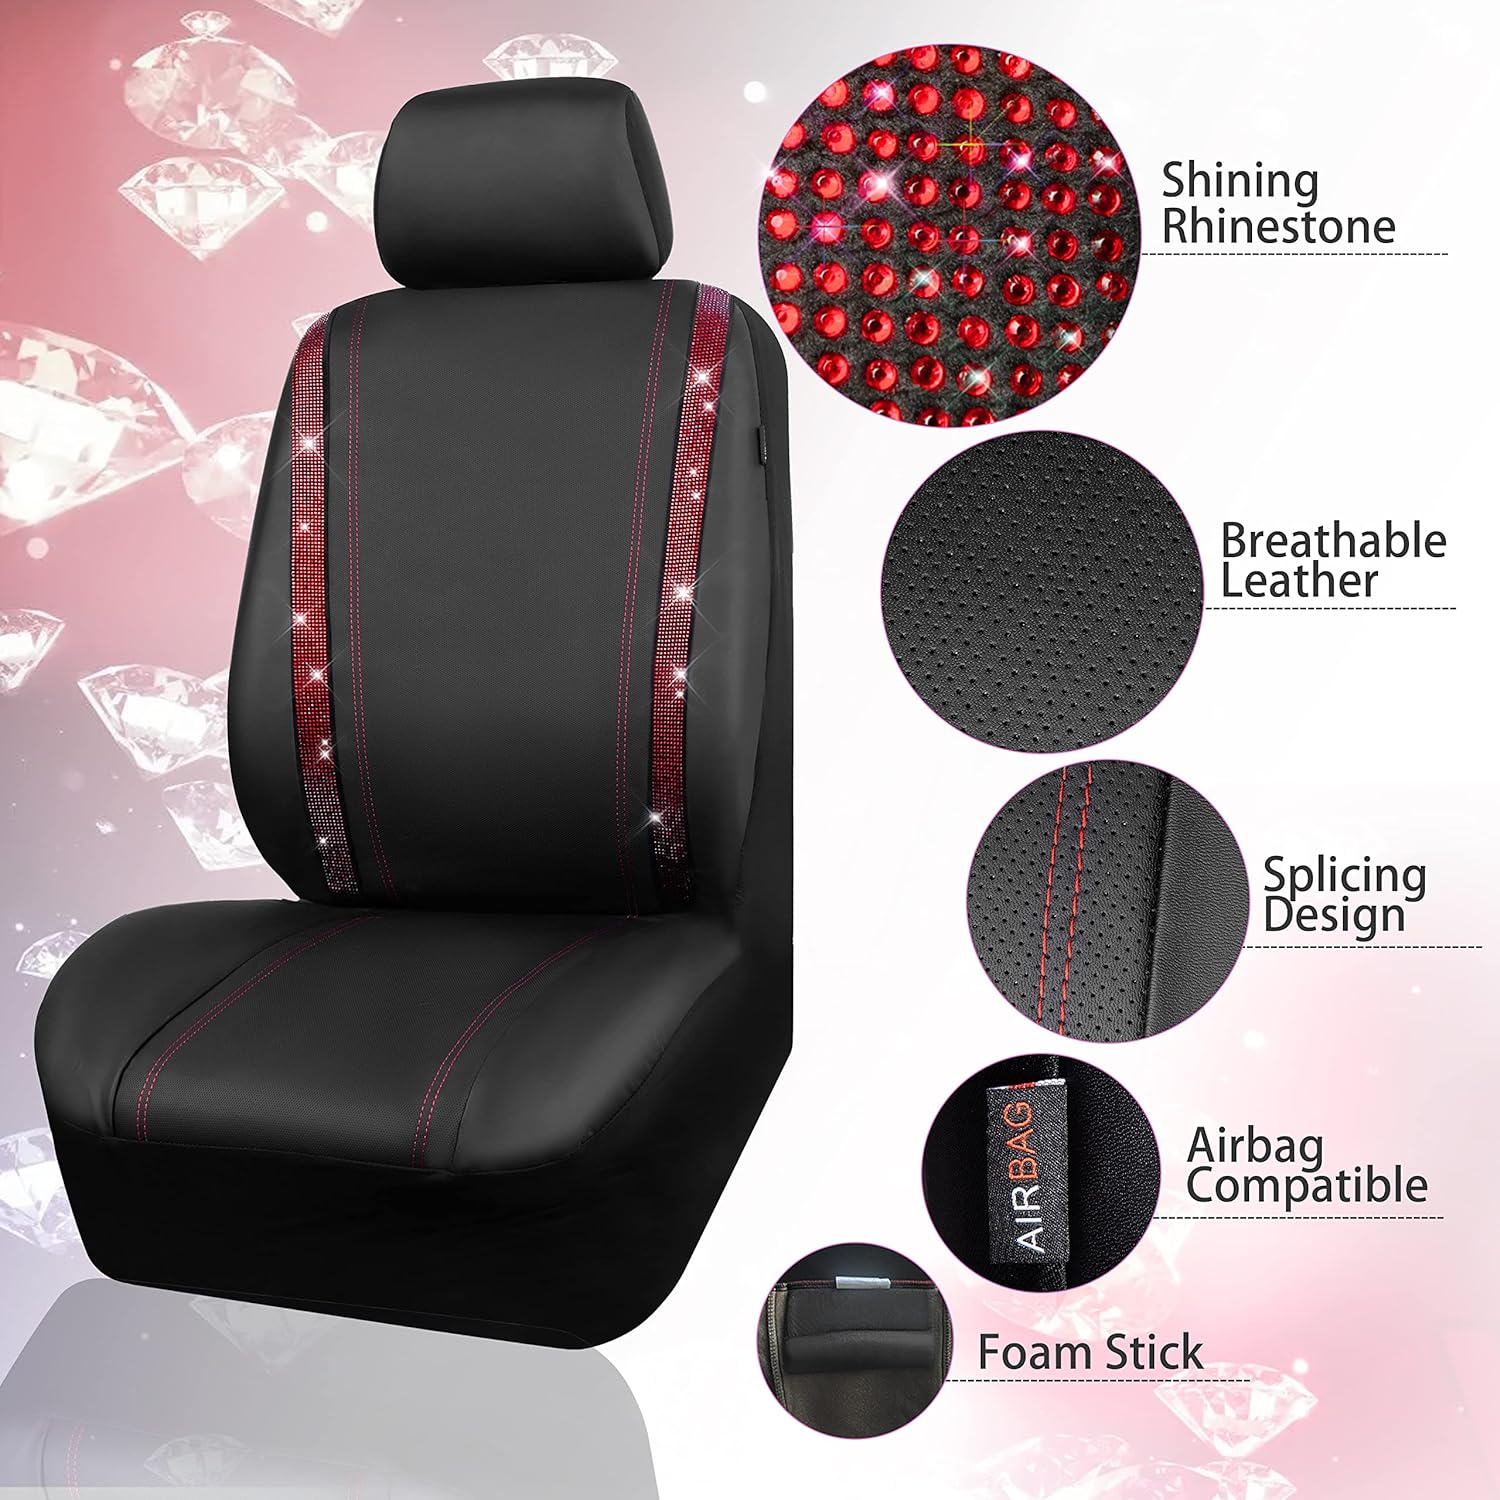 CAR PASS Bling Diamond Car Seat Covers Two Front Seats & Car Steering Wheel Cover, Red Diamond